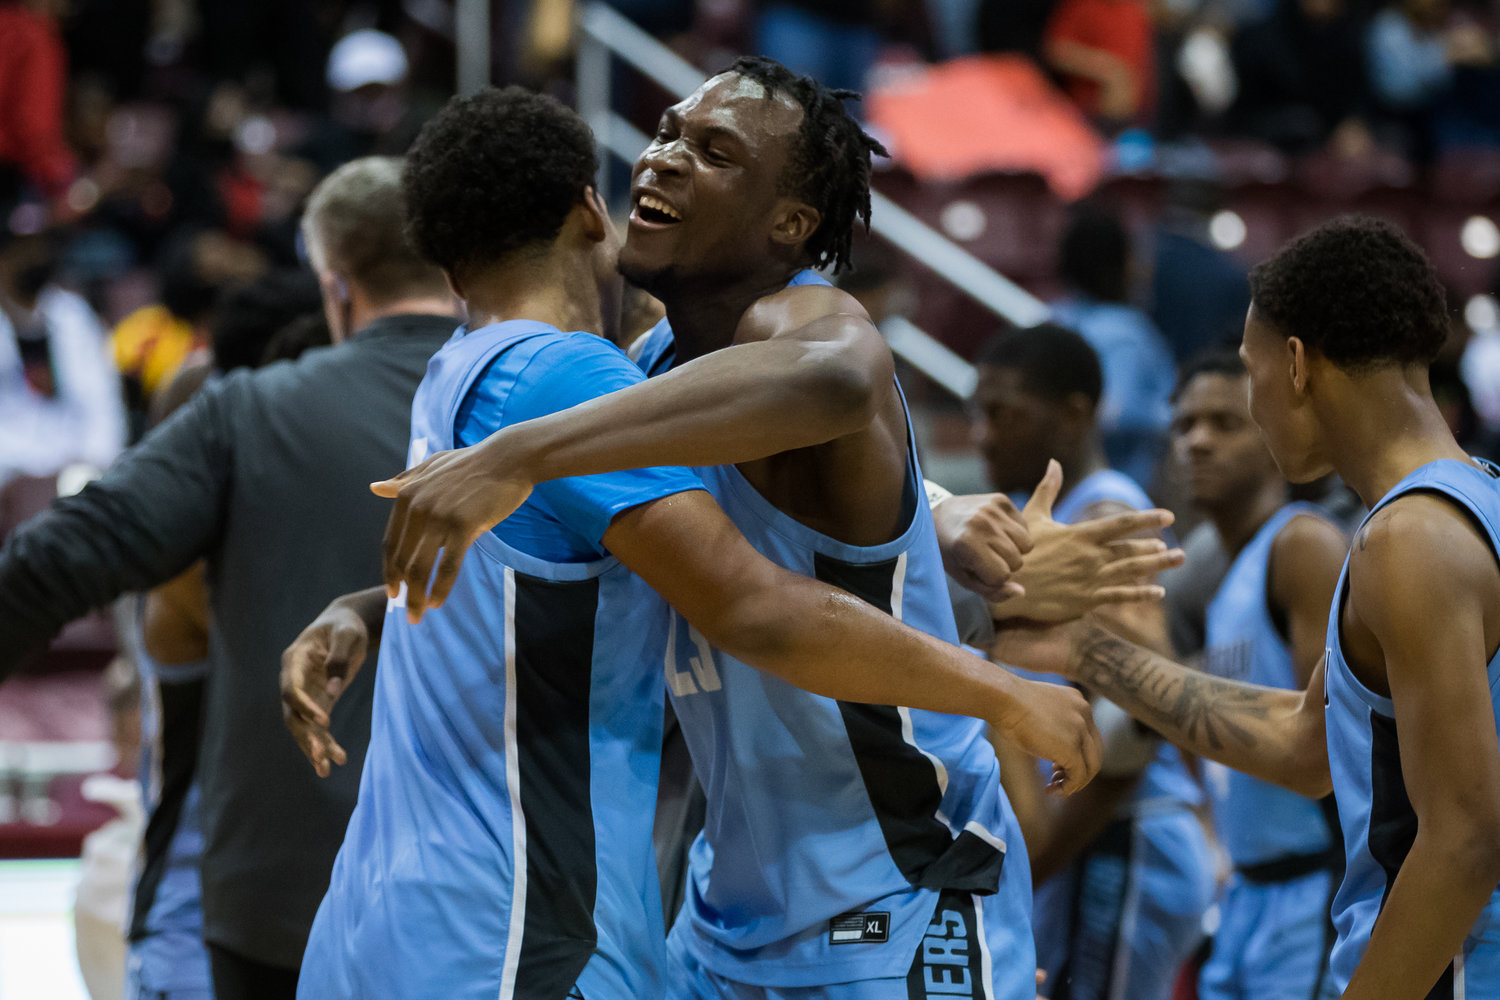 Paetow’s Everett Marlatt (22), left, and Charles Chukwu (23) celebrate the Panthers’ victory over Goose Creek Memorial in Tuesday’s Class 5A Region III semifinals at the Campbell Center in Houston.